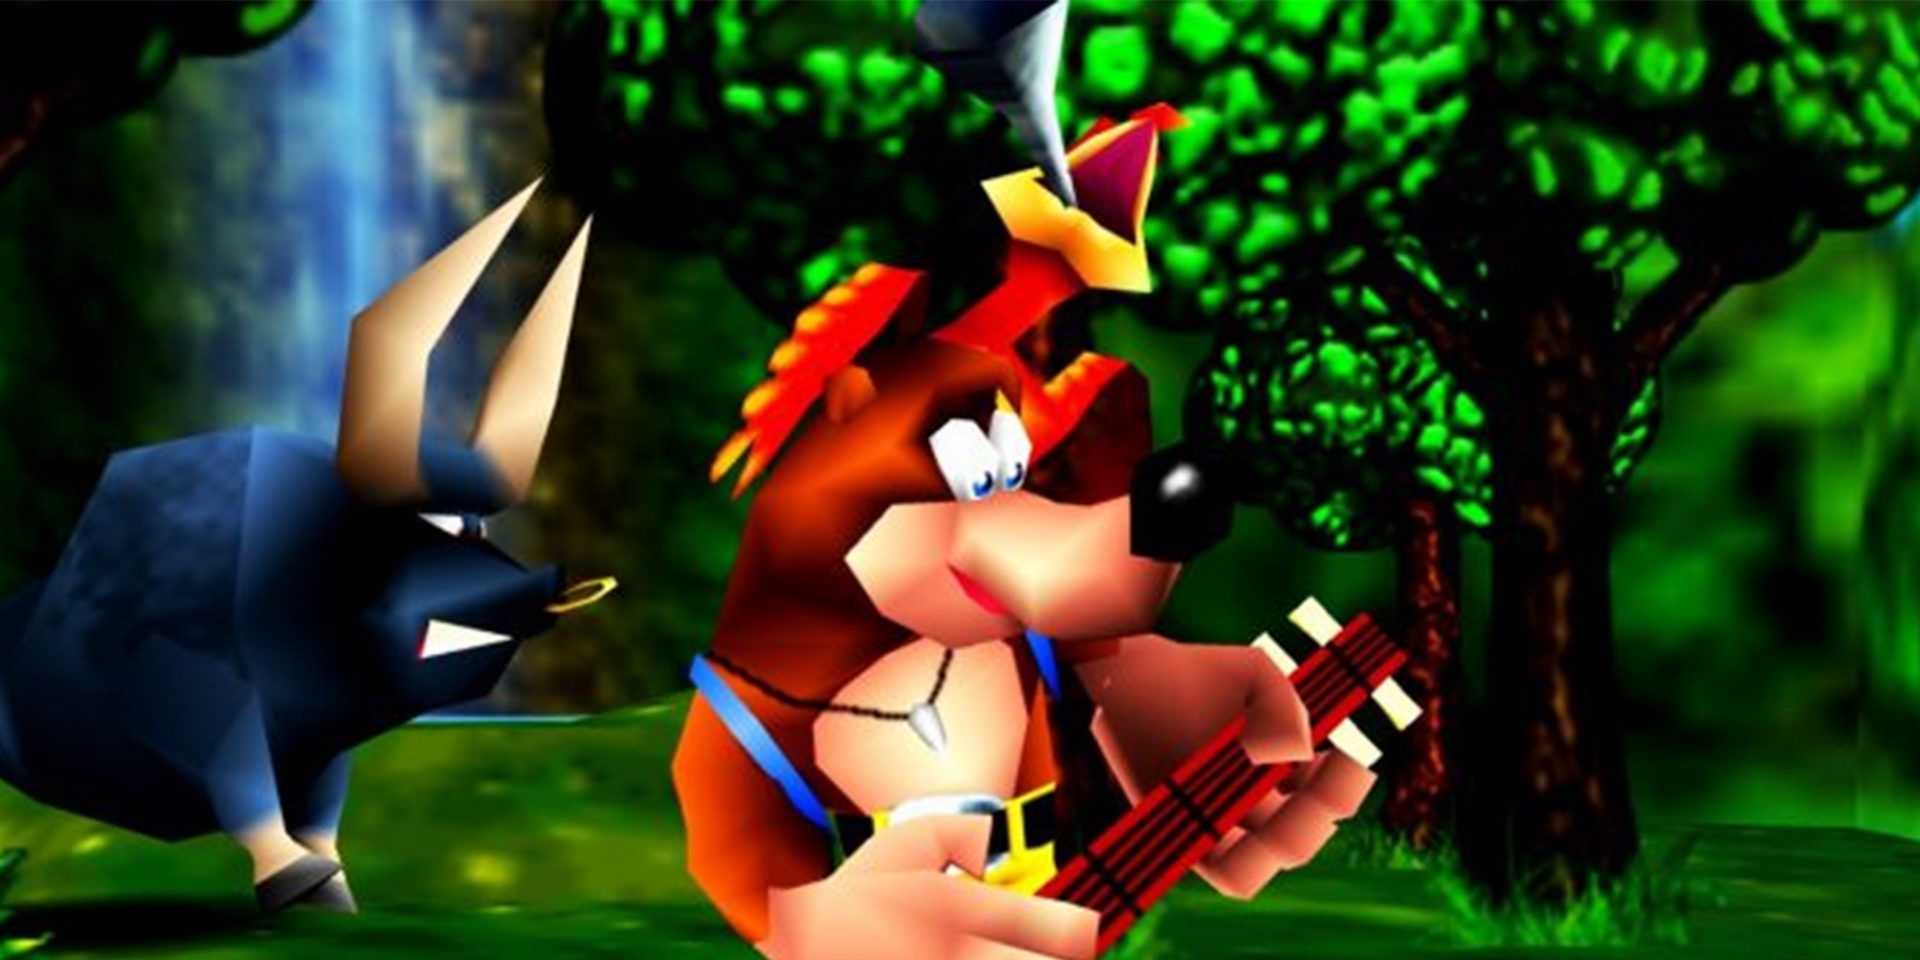 Banjo Playing A Banjo And Kazooie Playing A Kazoo While A Bull Runs In The Background